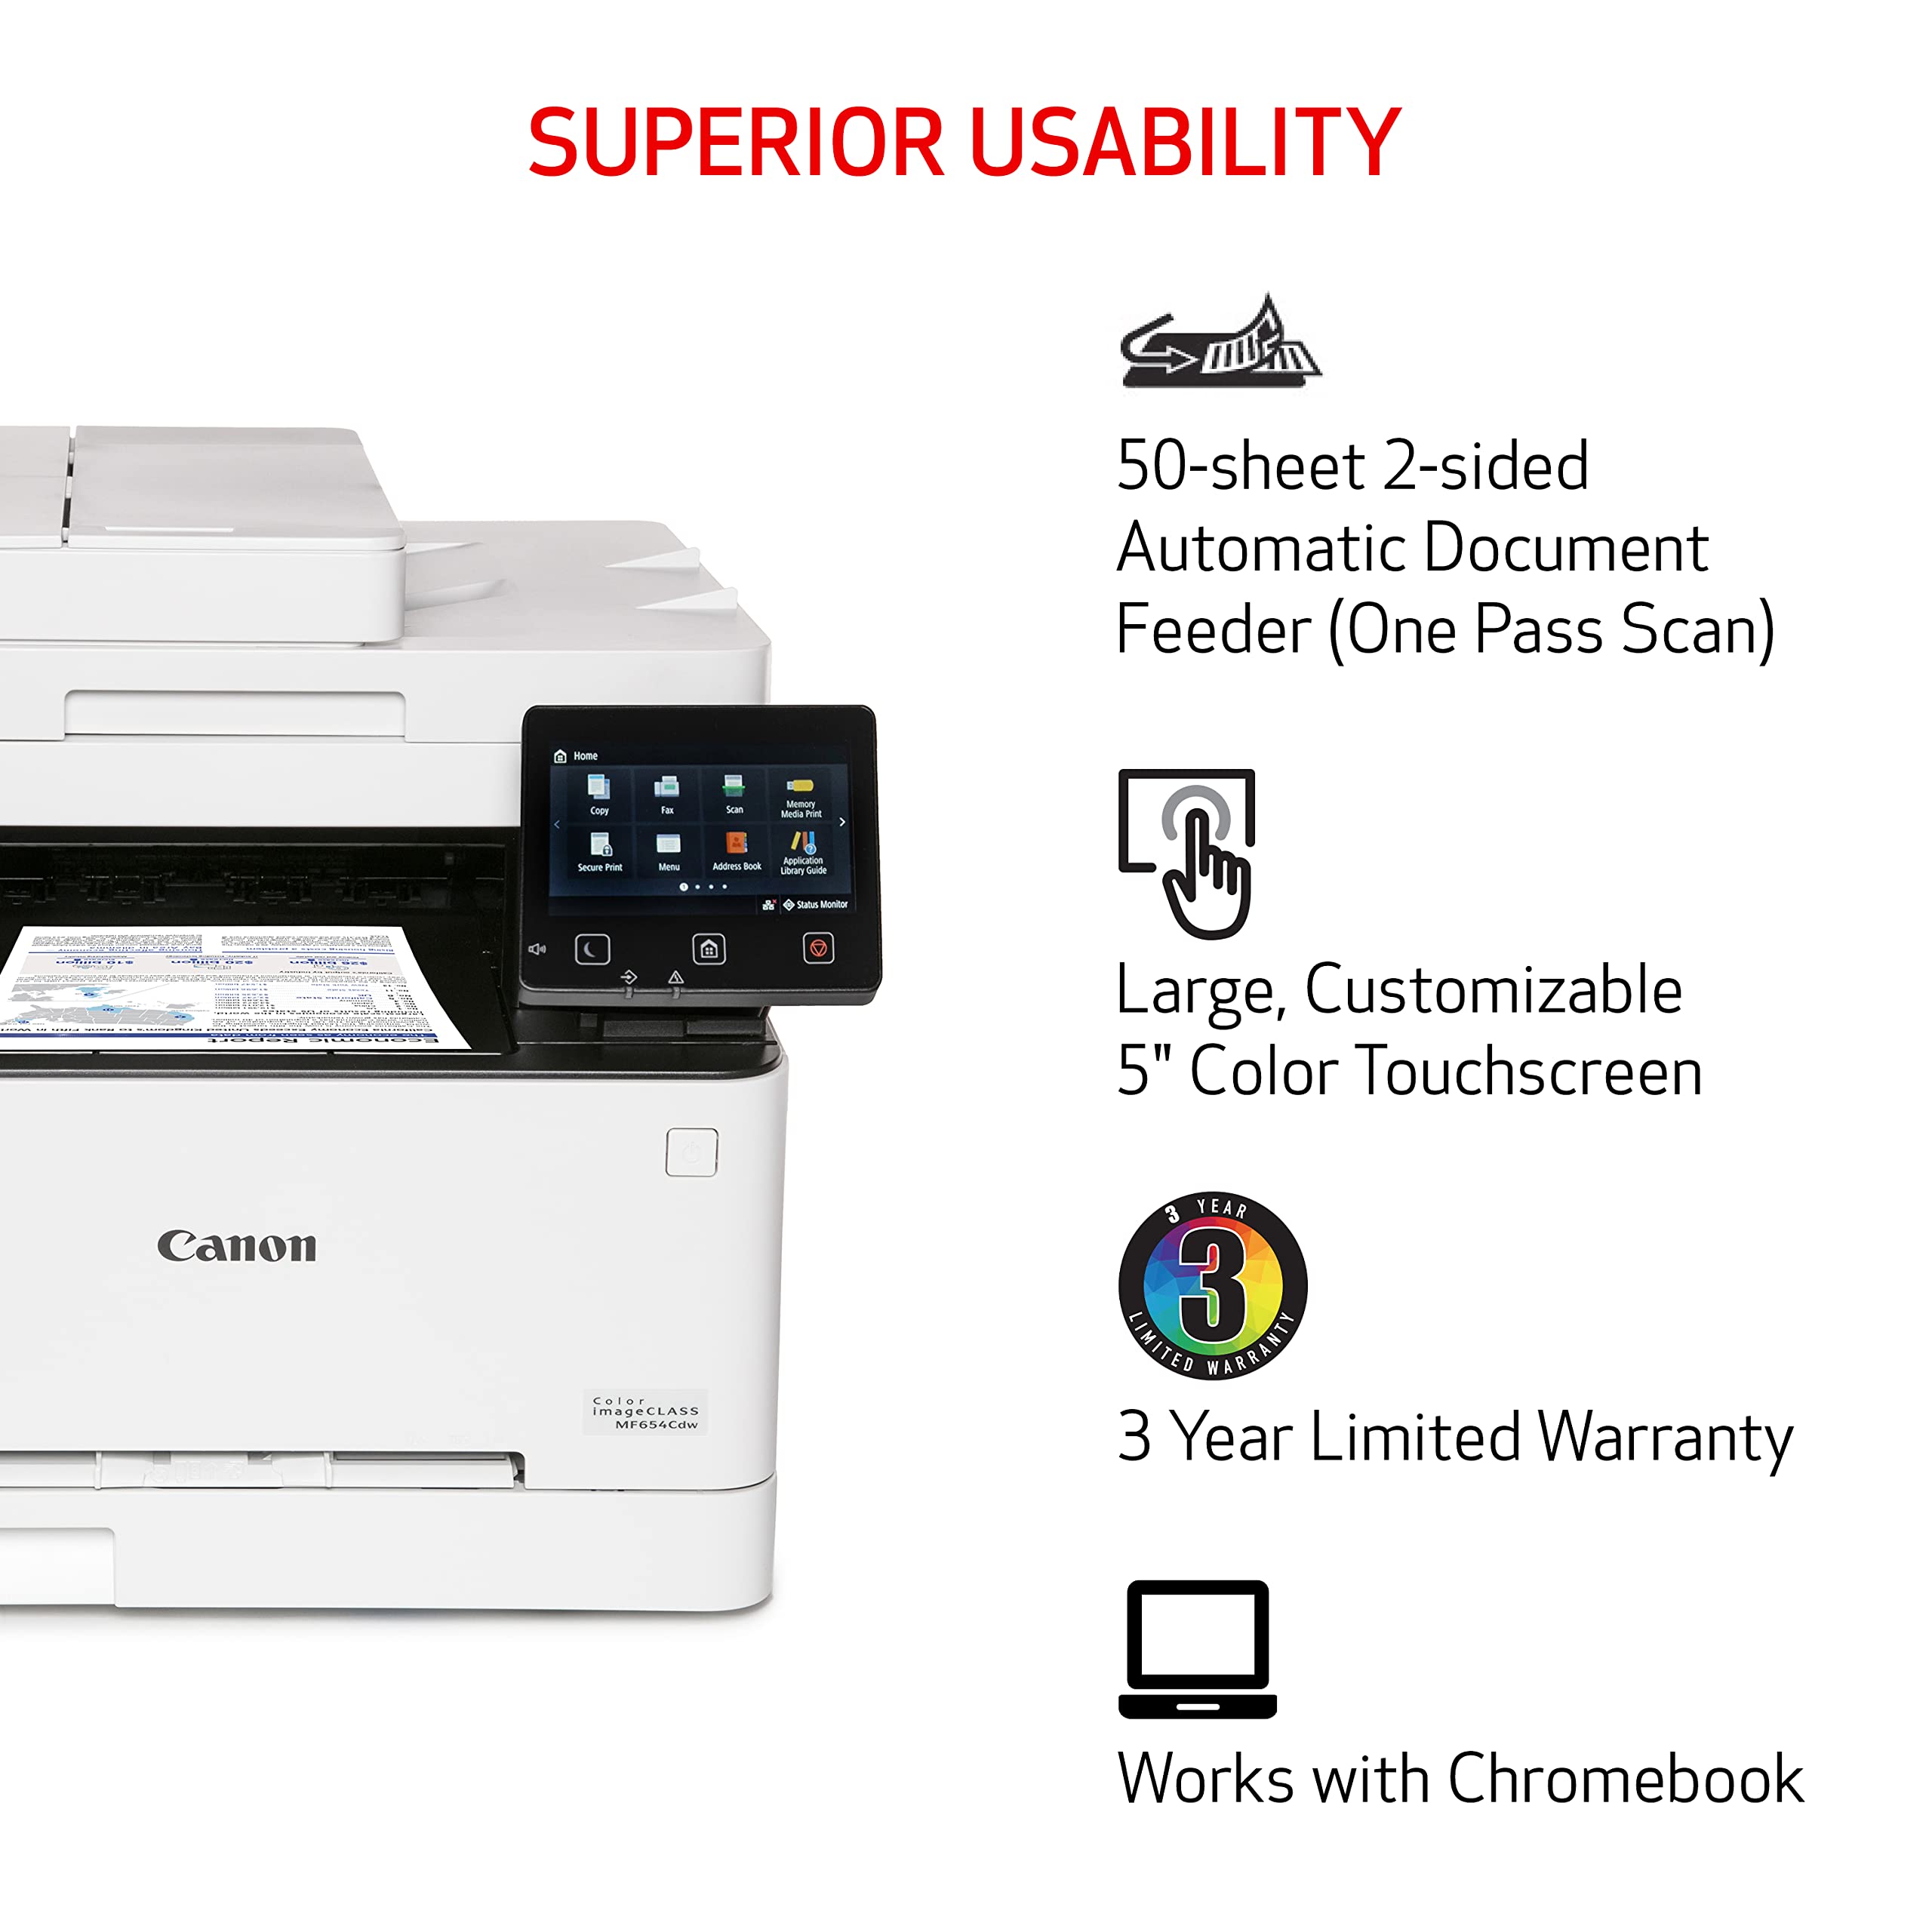 Canon Color imageCLASS MF656Cdw - All in One, Duplex, Wireless Laser Printer with 3 Year Limited Warranty, White